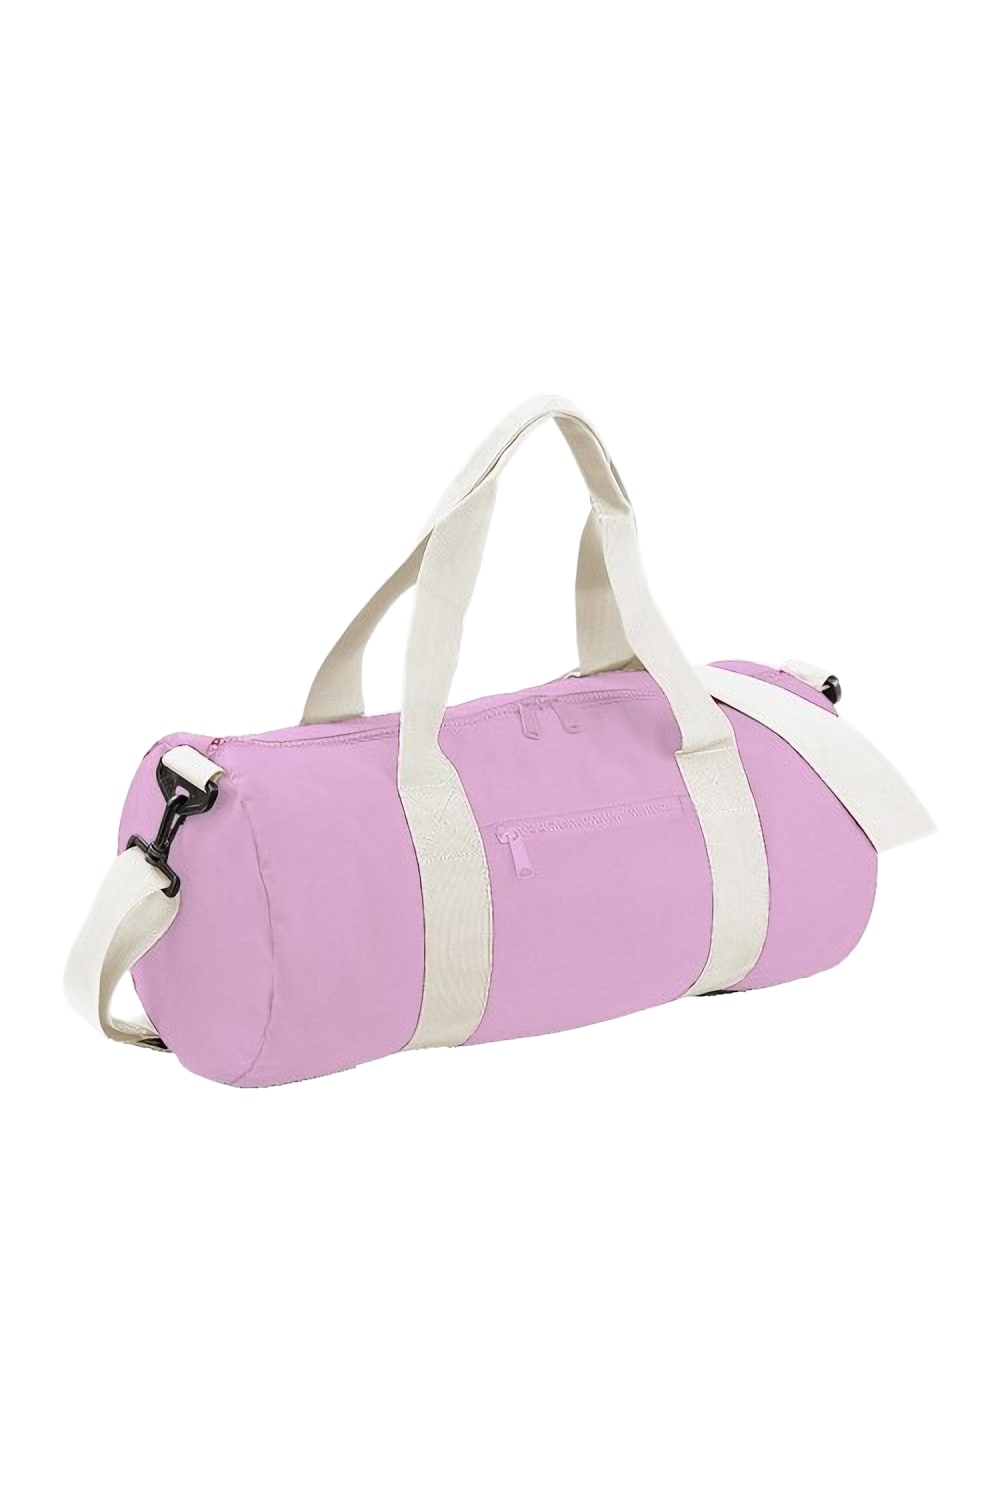 Bagbase Plain Varsity Barrel/Duffel Bag (5 Gallons) (Pack of 2) (CLassic Pink/White) (One Size)